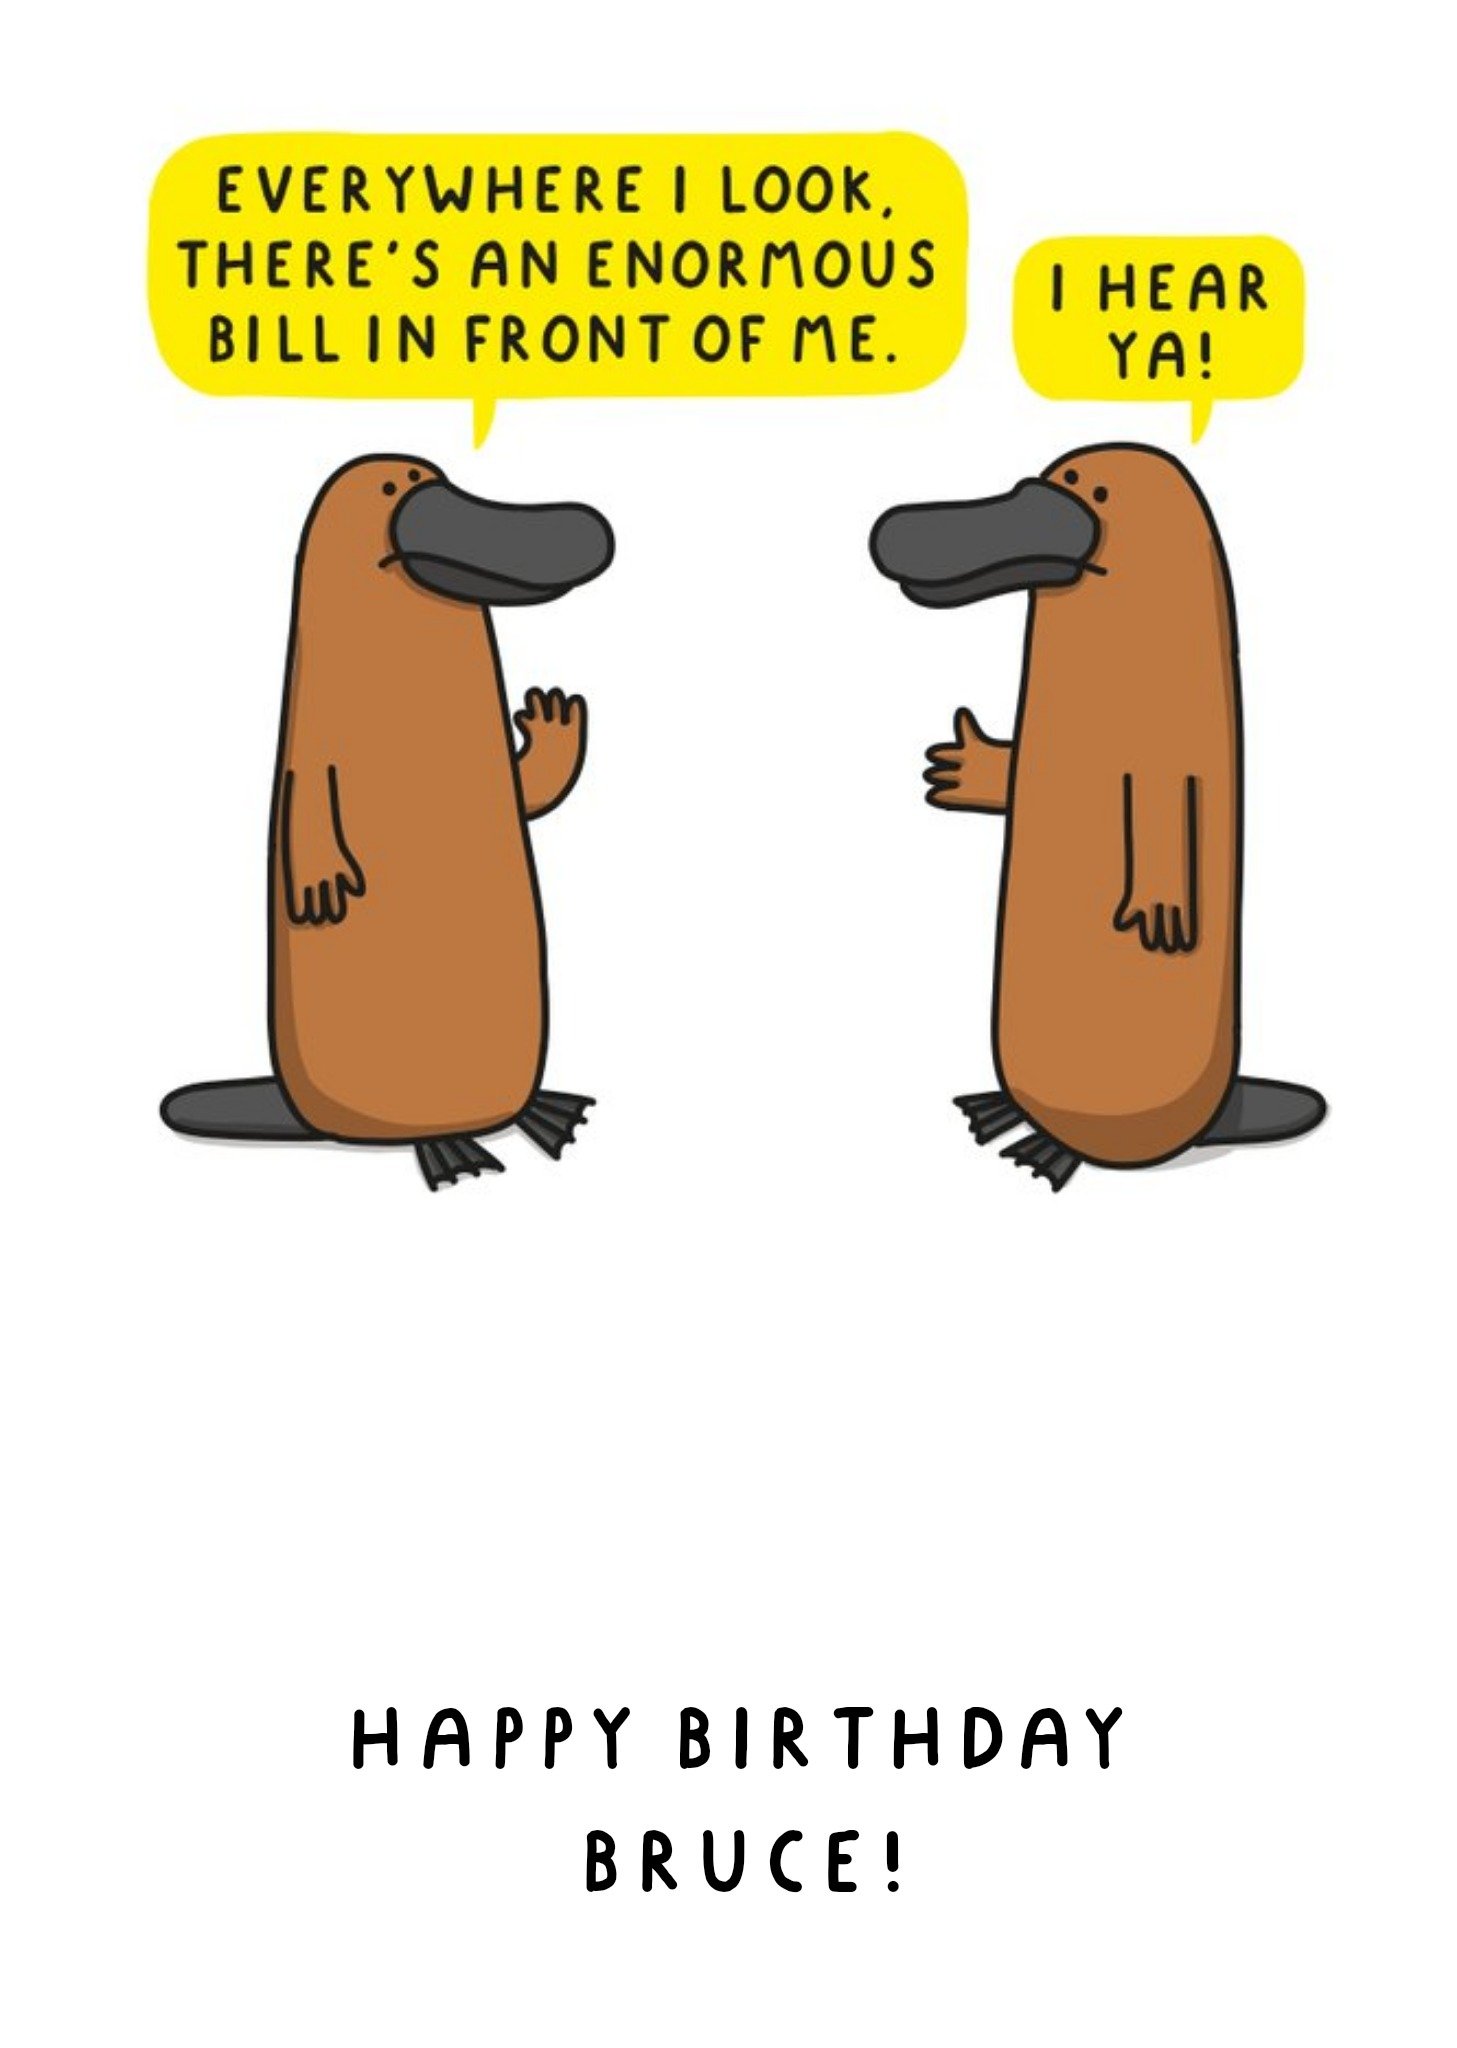 Moonpig Illustration Of A Pair Of Platypuses Funny Pun Birthday Card, Large